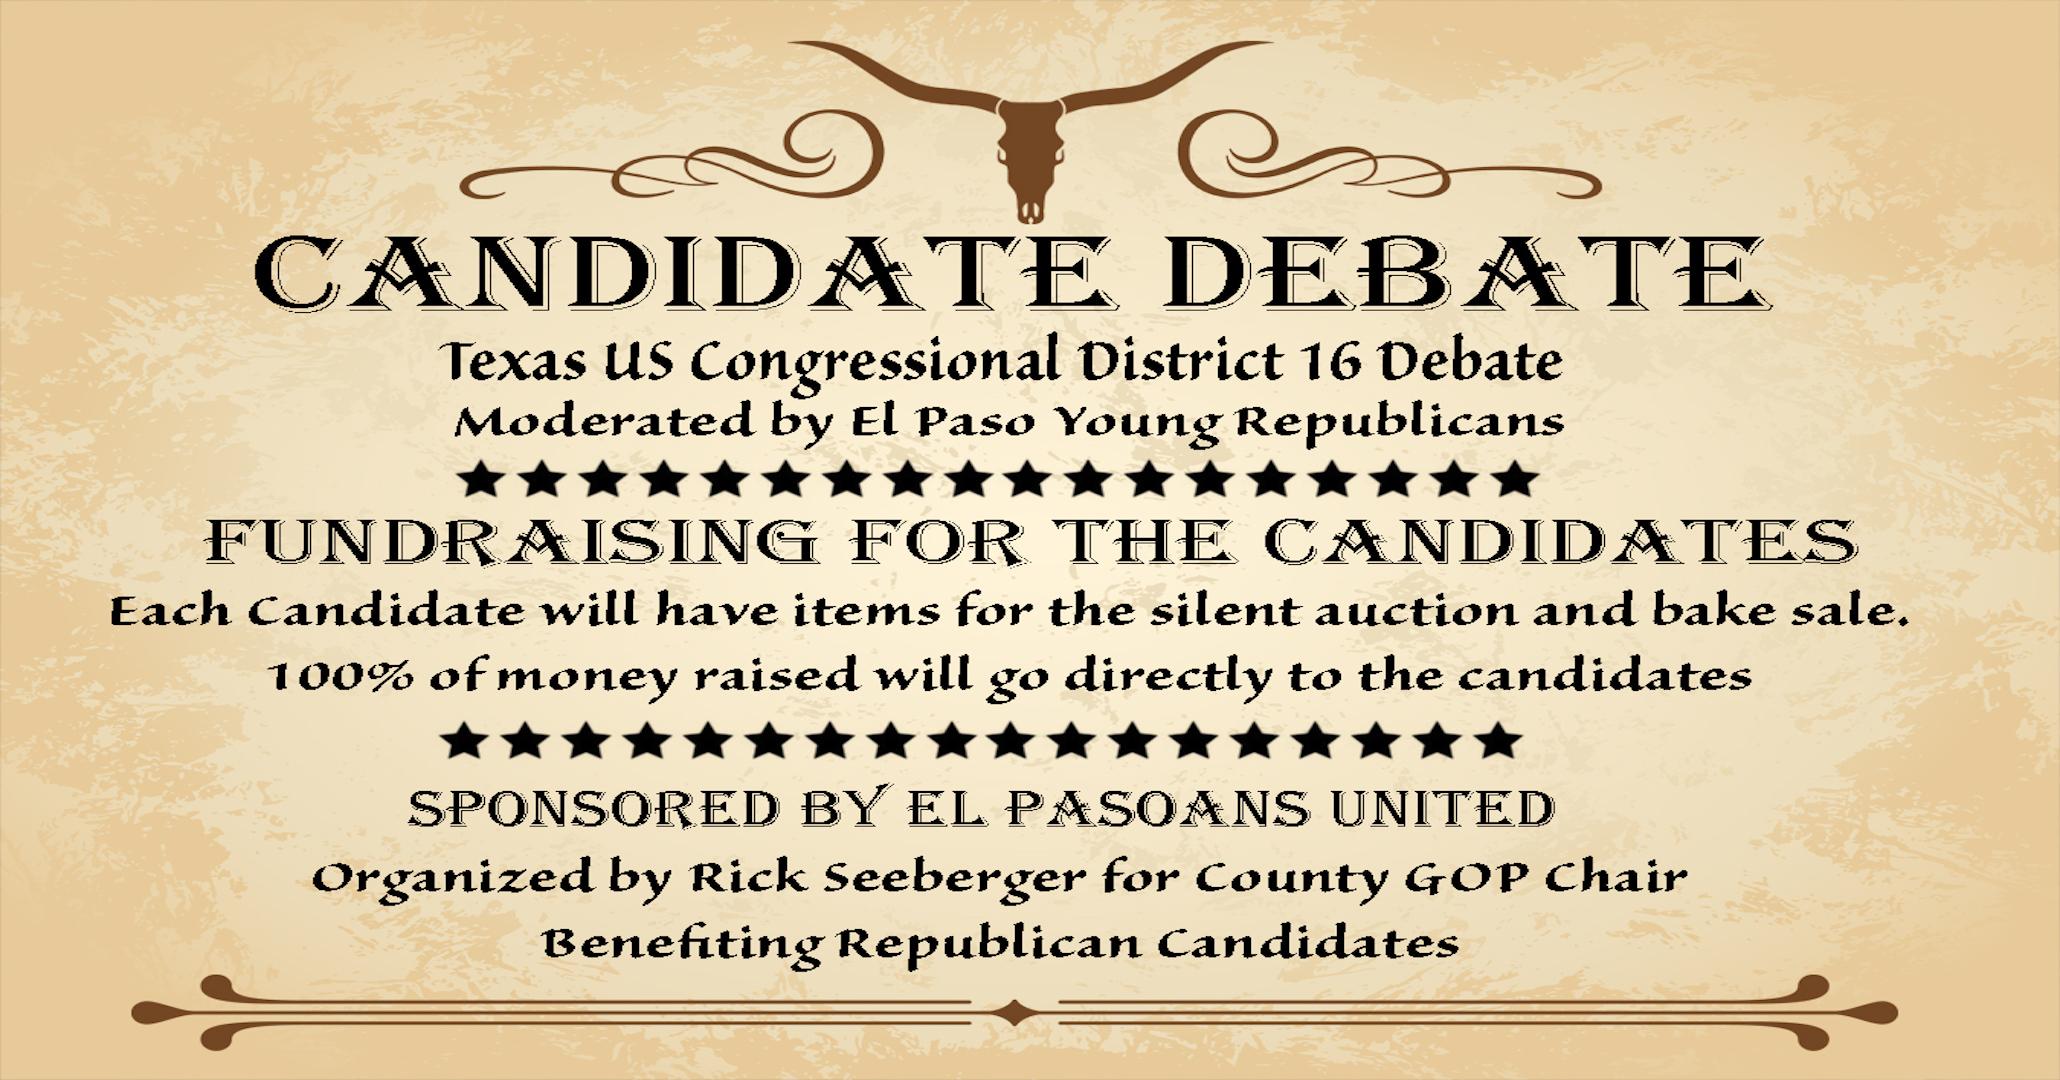 Congressional Candidate Debate and Fundraiser